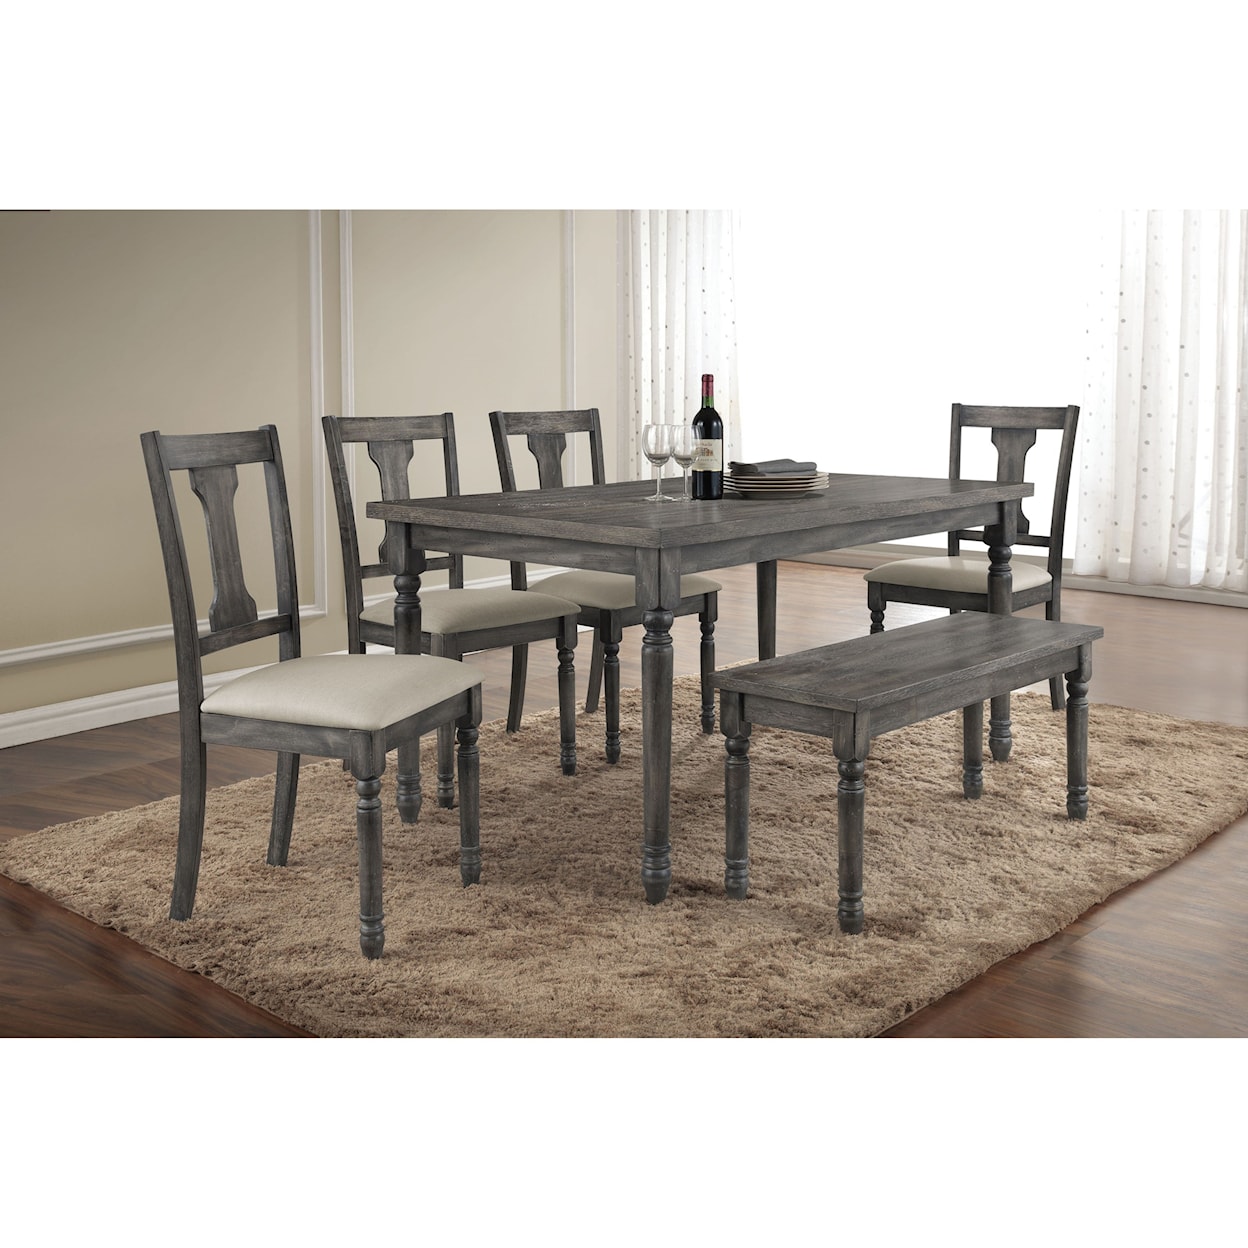 Acme Furniture Wallace Dining Table Set with Bench